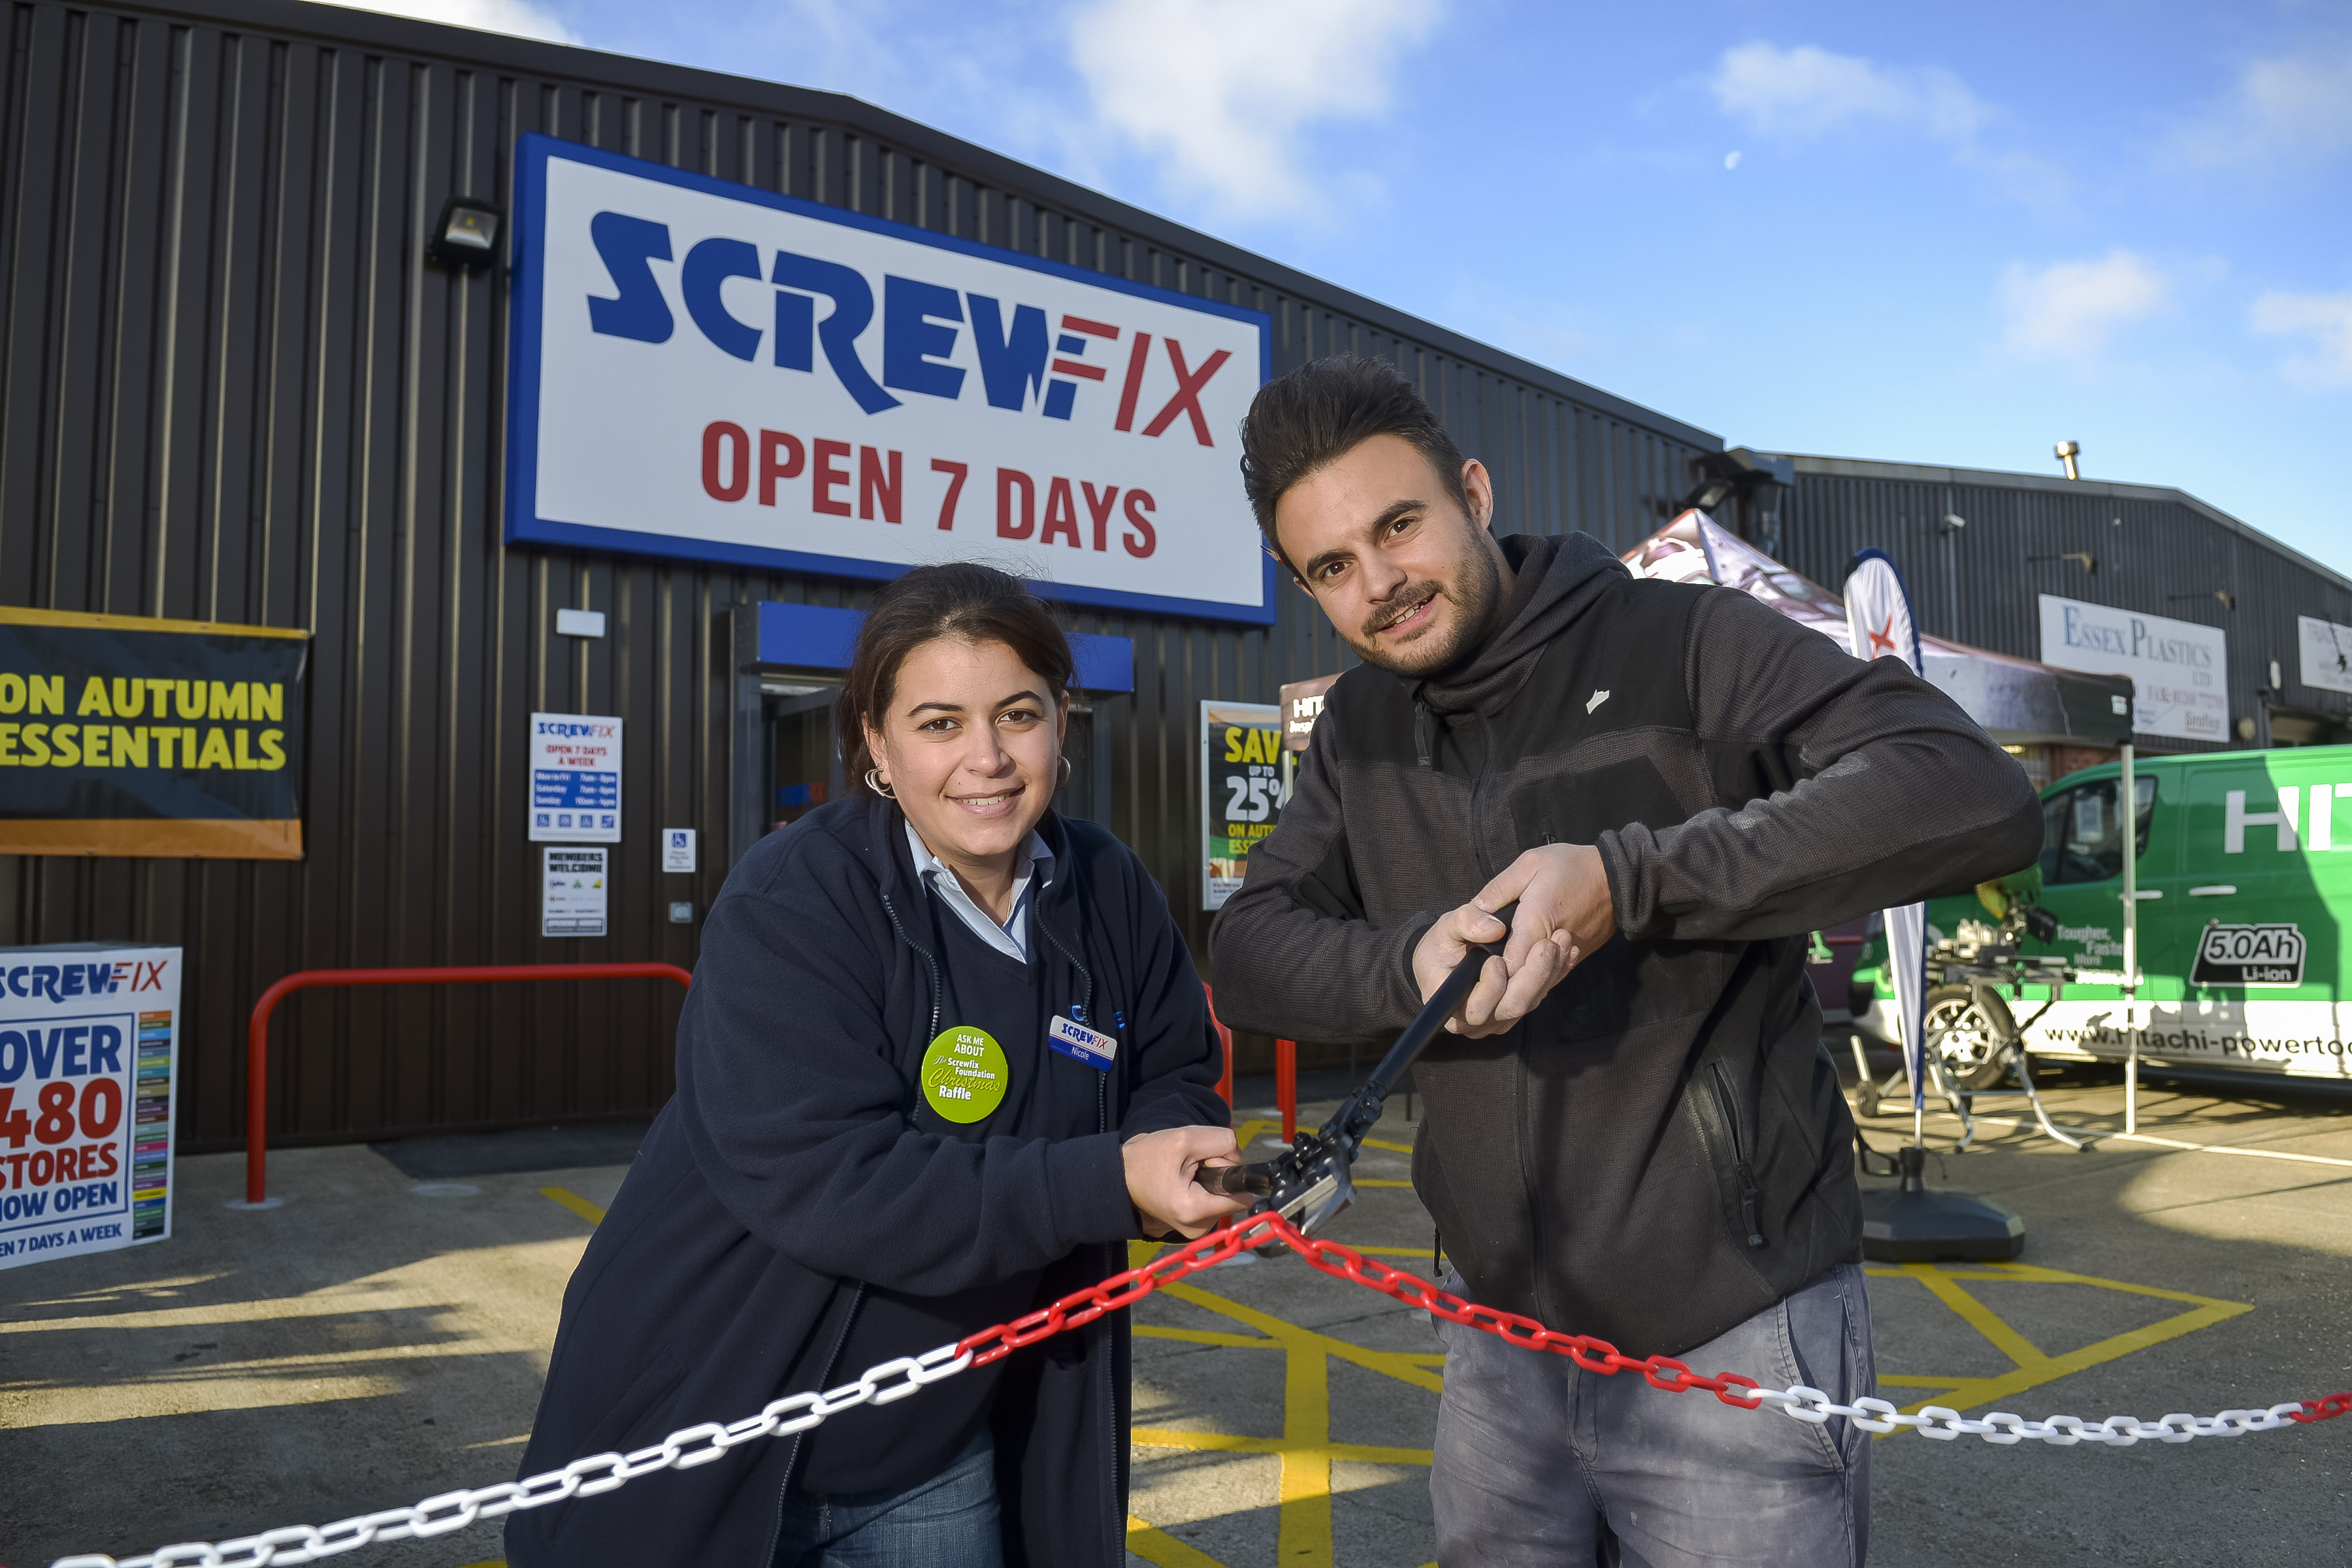 Rayleigh’s first Screwfix store is declared a runaway success